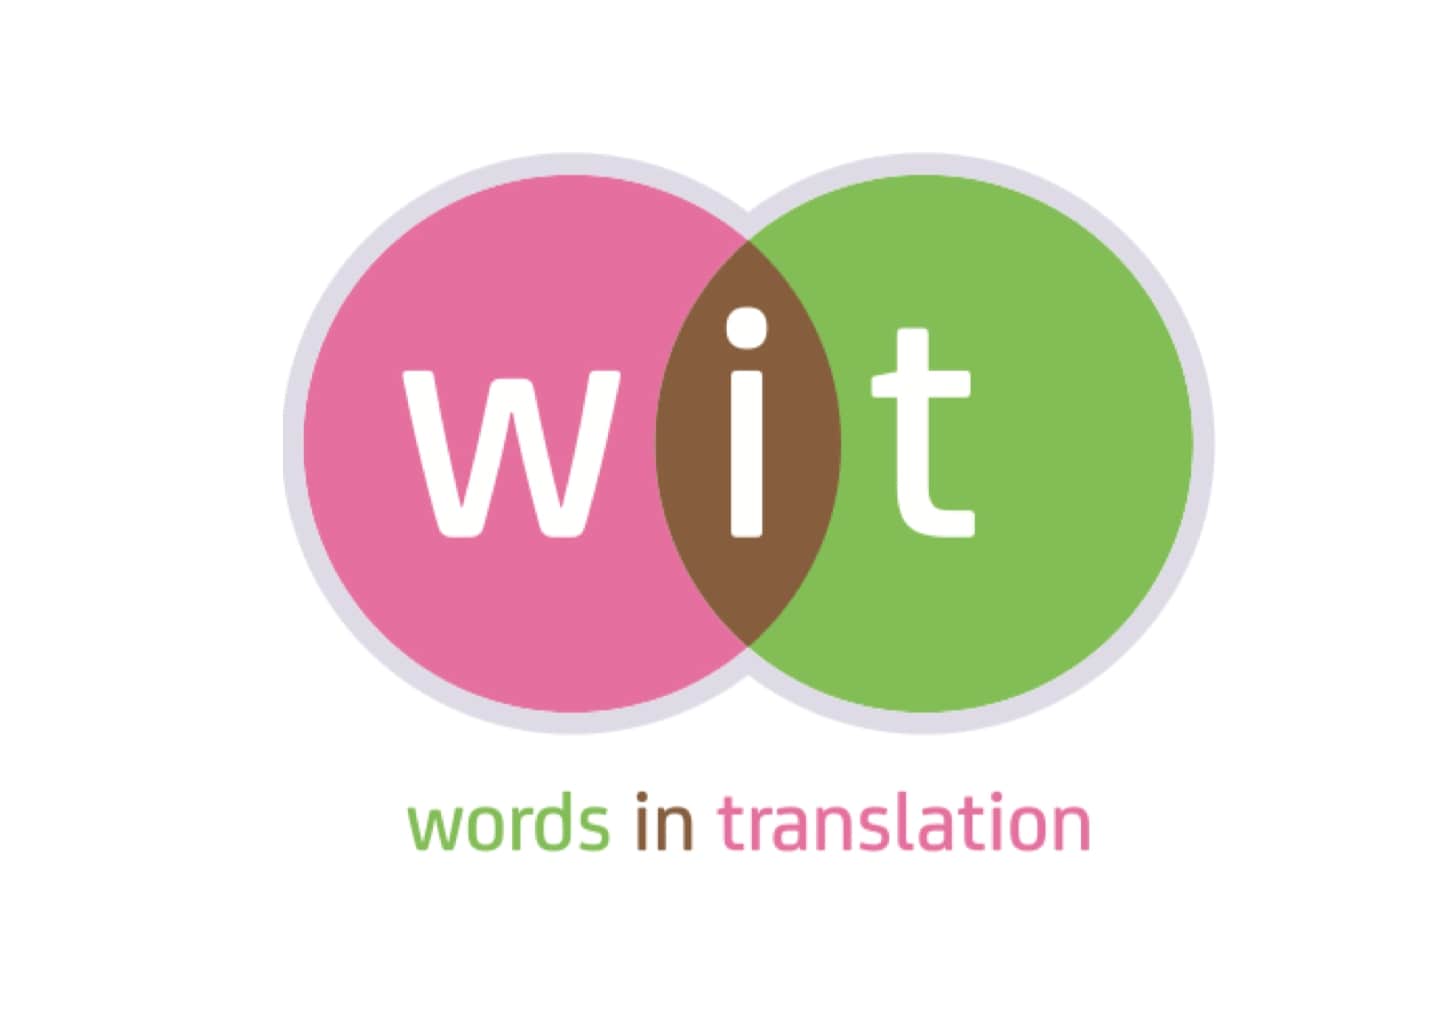 Transcreation 101 – Translating with flying colours